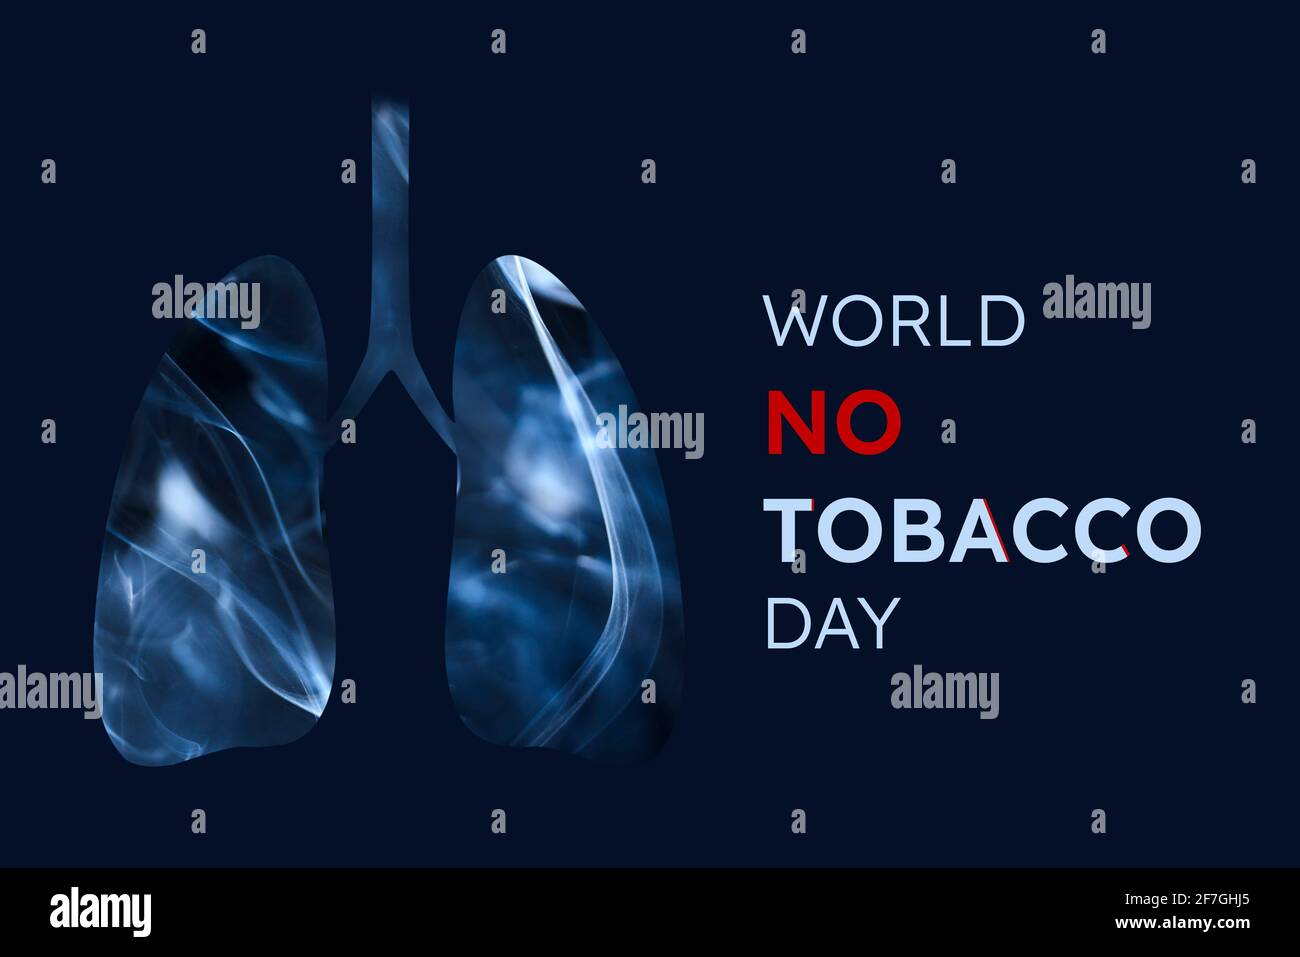 Smoker lungs, full of smoke. horizontal image with dark blue background and text World No Tobacco Day. Concepts of quitting smoking and health. Stock Photo